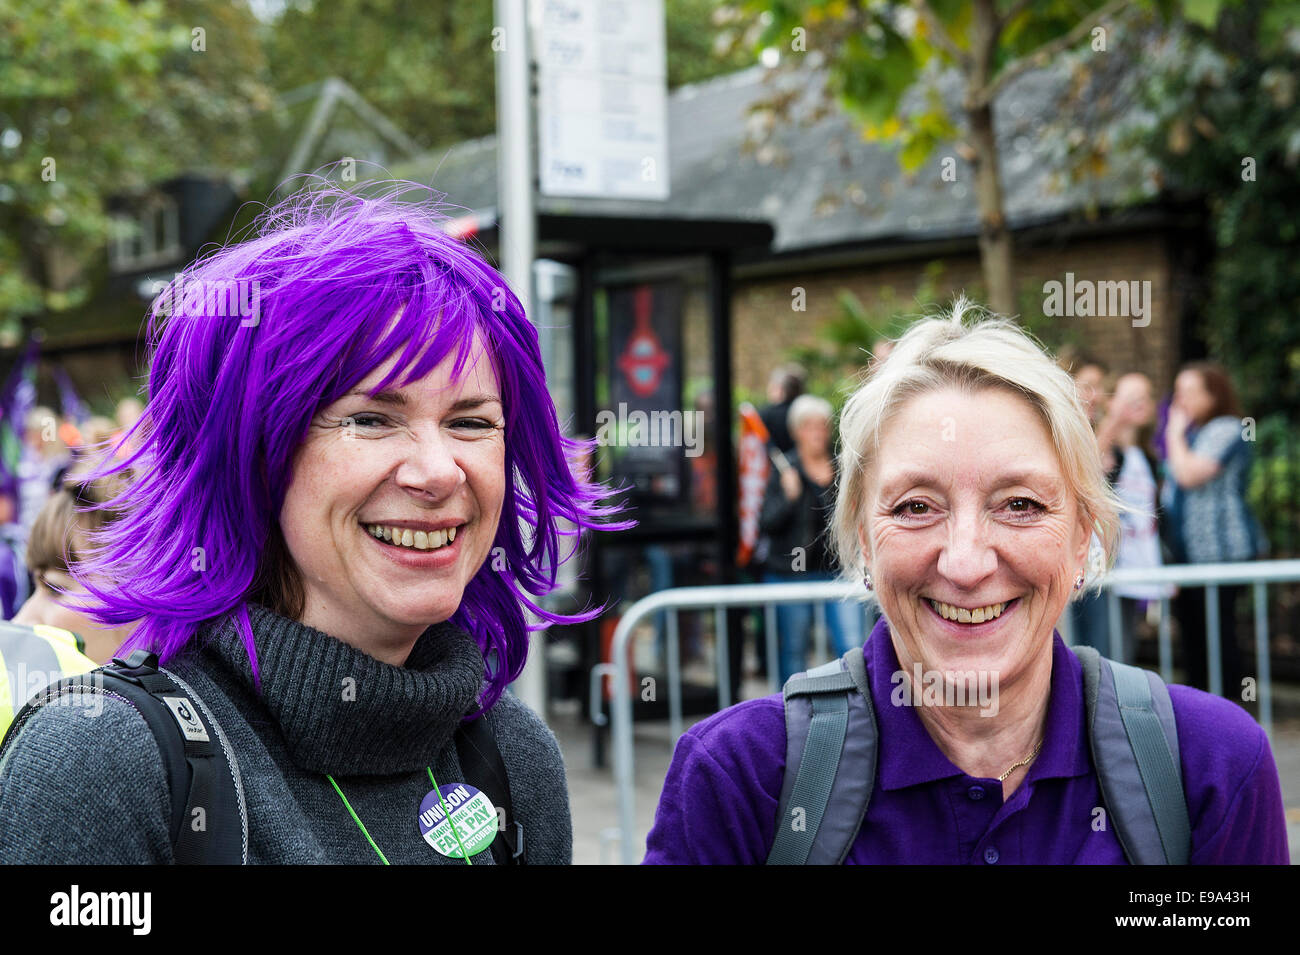 A TUC national demonstration in Central London. Two colourful members of  UNISON enjoying the march. Stock Photo